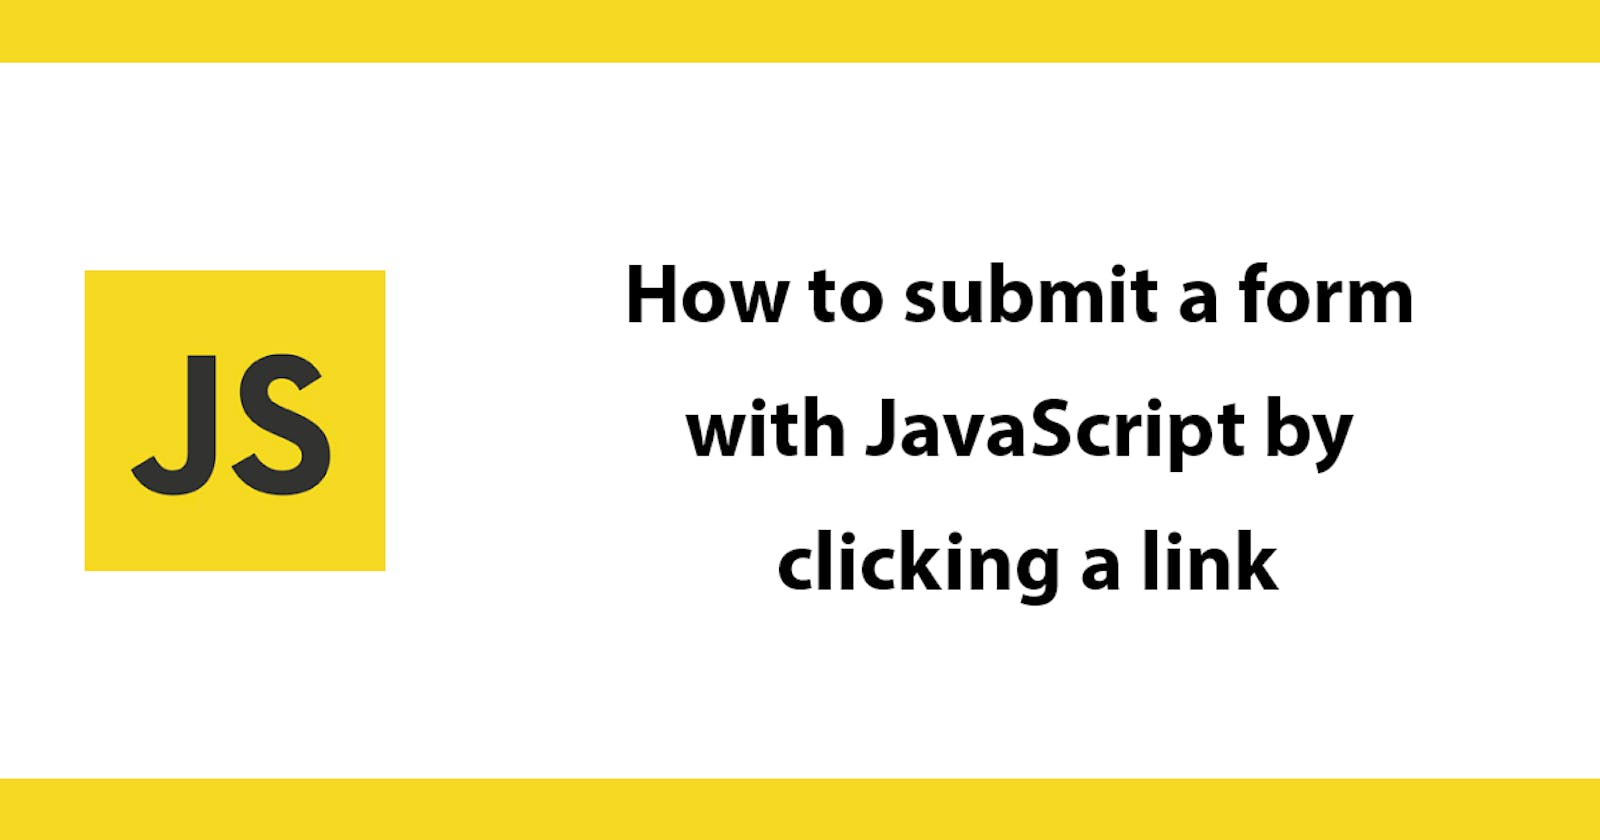 How to submit a form with JavaScript by clicking a link